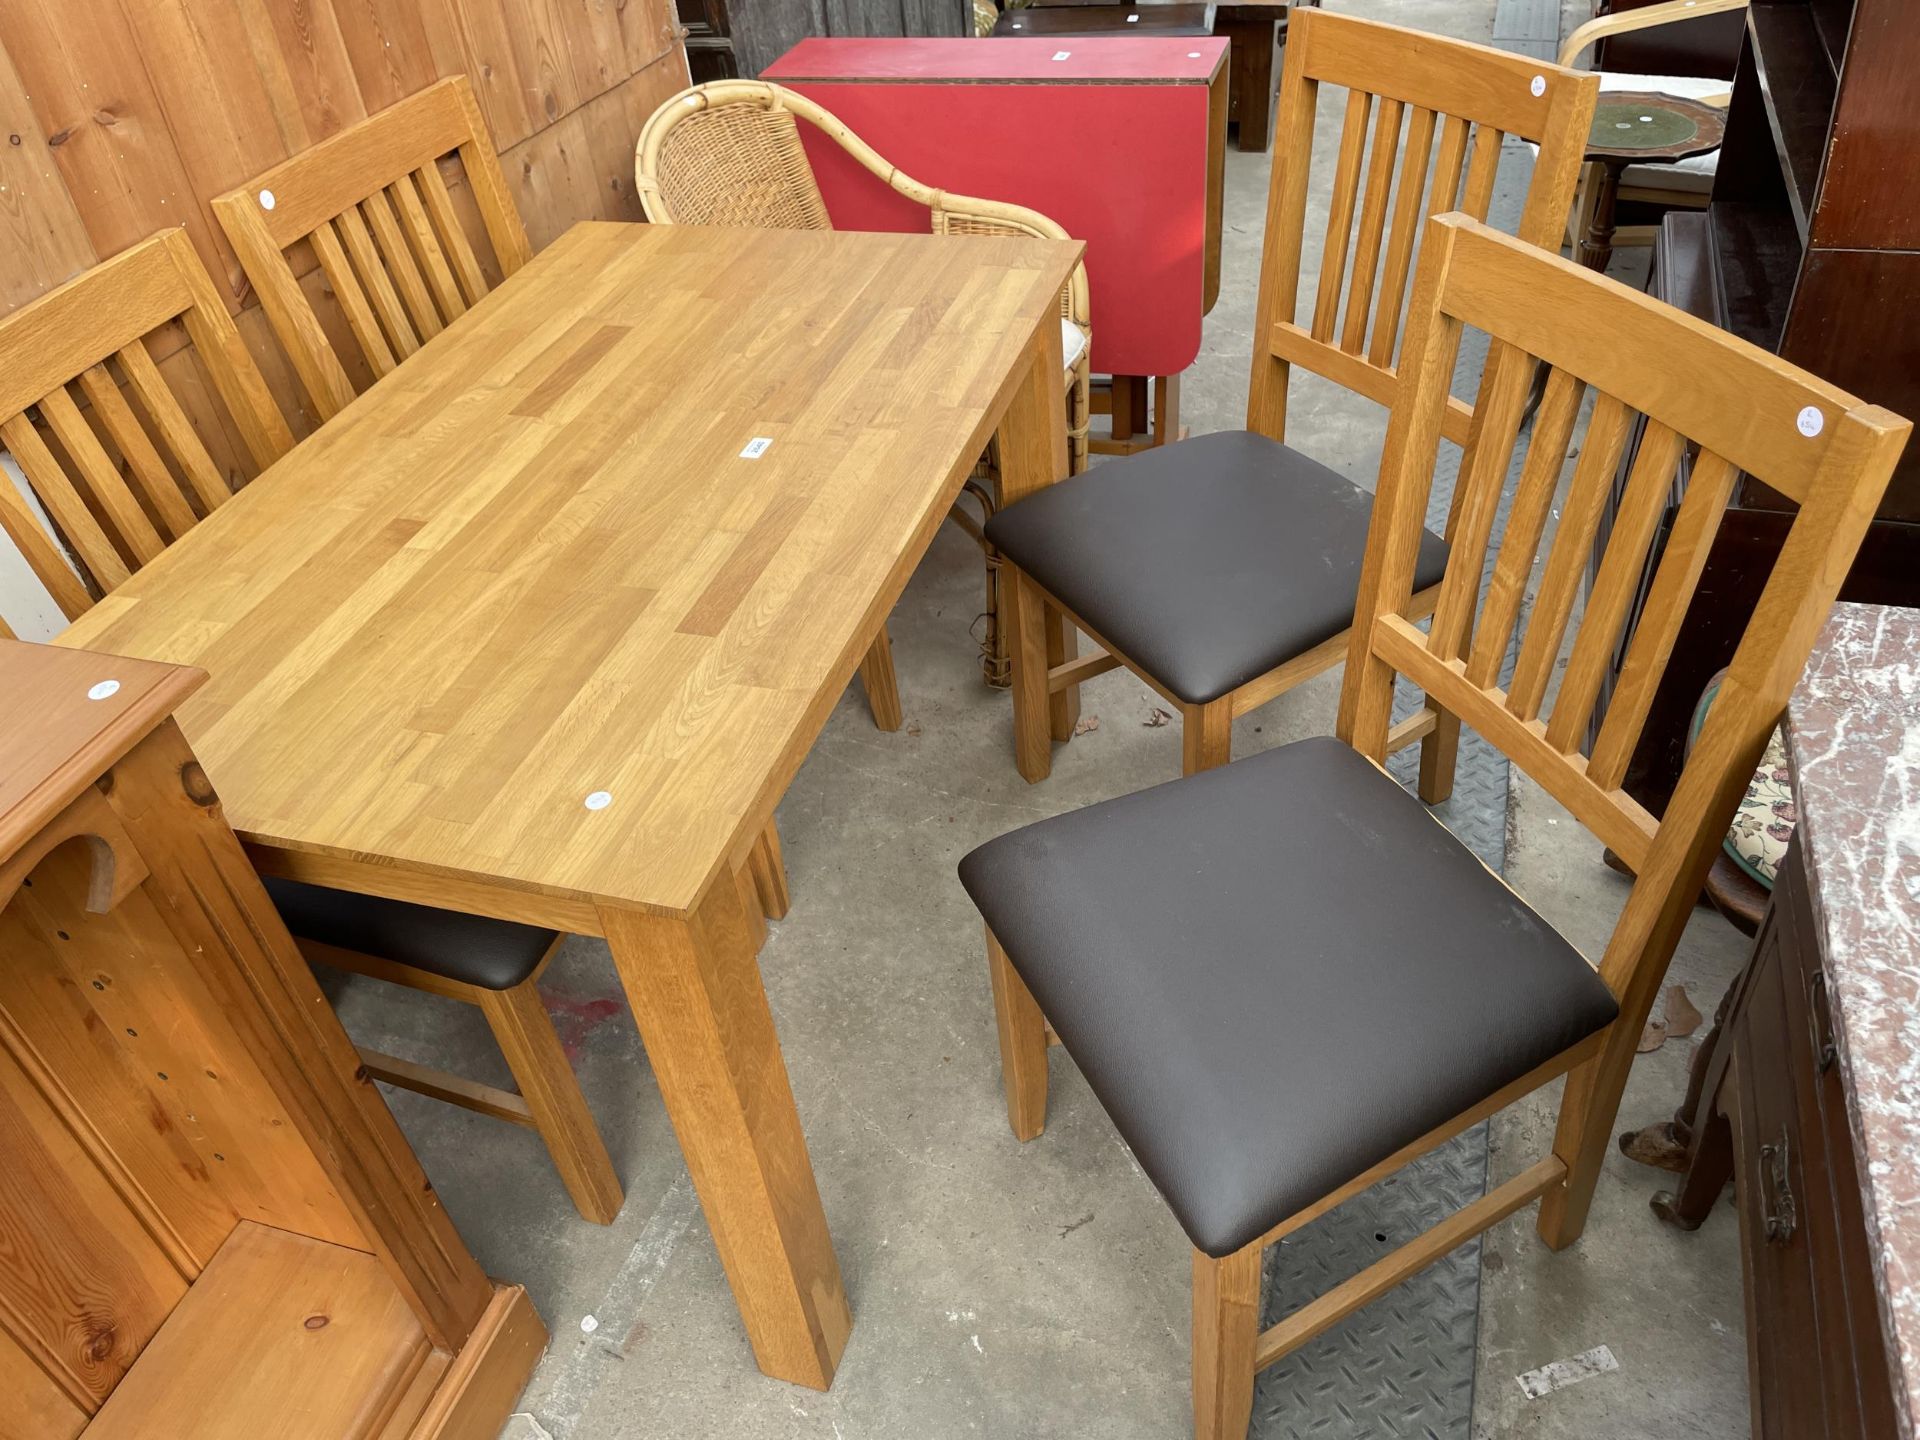 A MODERN OAK WOODBLOCK DINING TABLE, 45" X 28", AND FOUR CHAIRS - Image 2 of 5